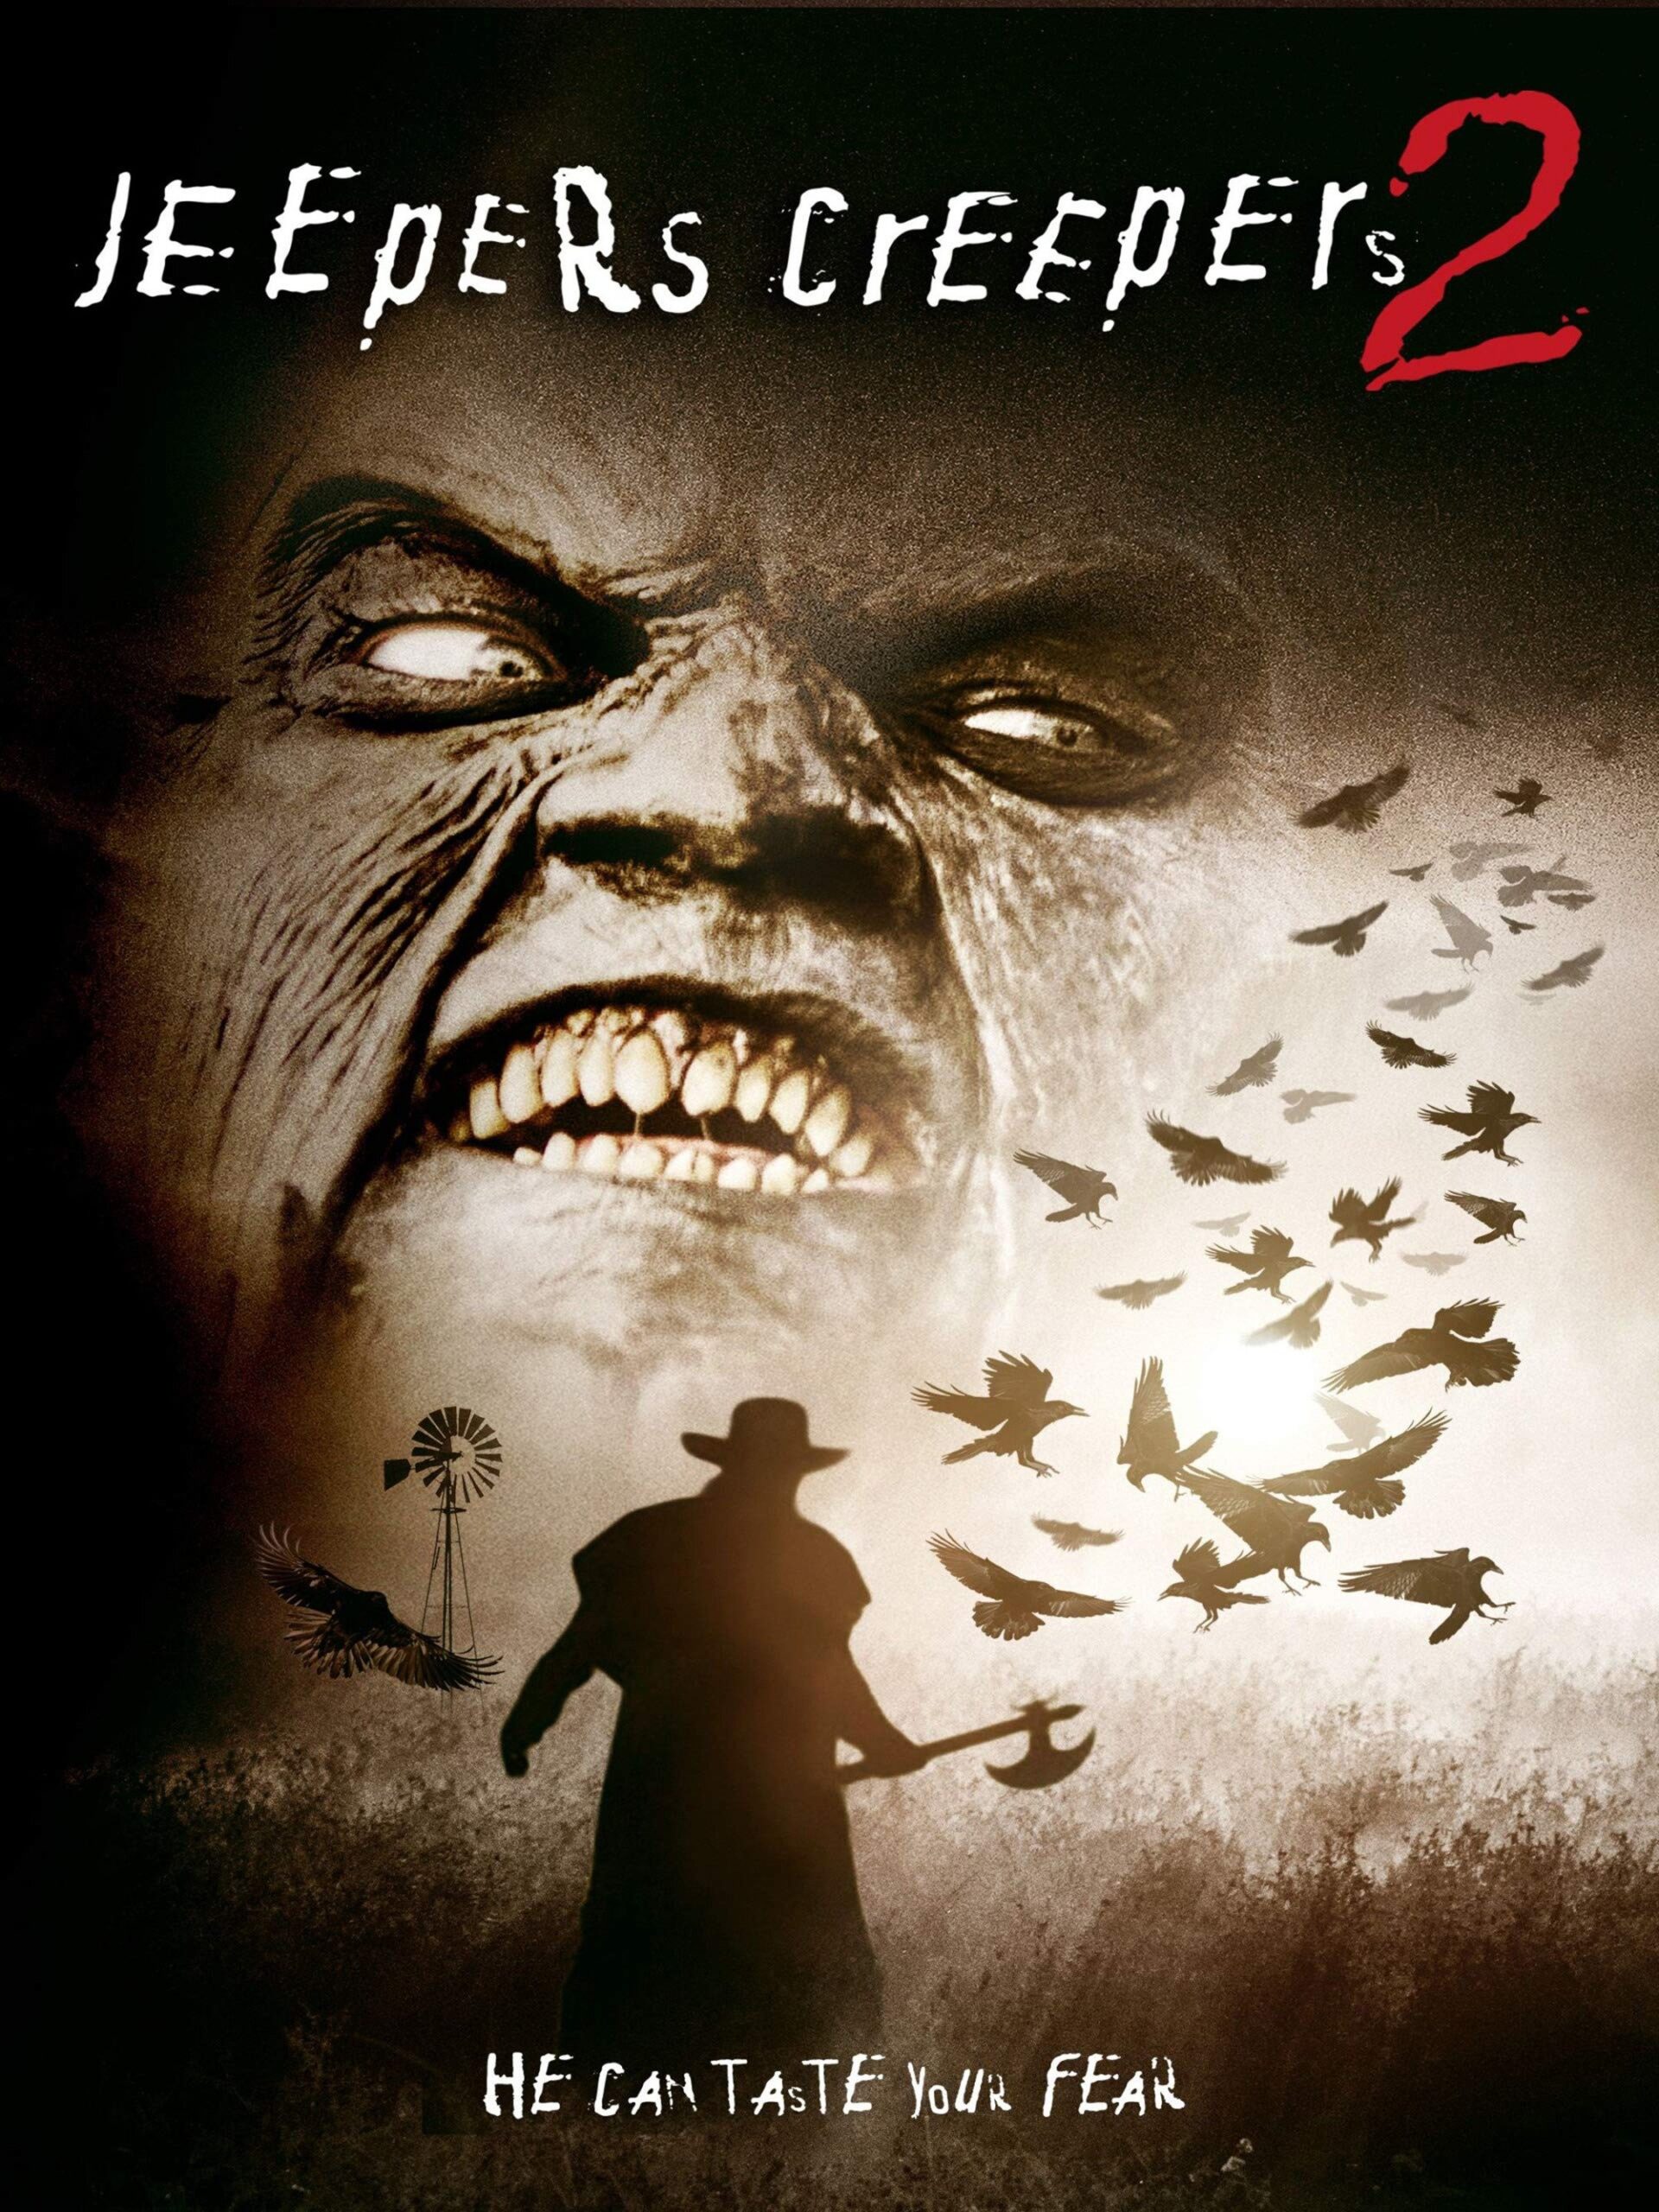 history of jeepers creepers movie